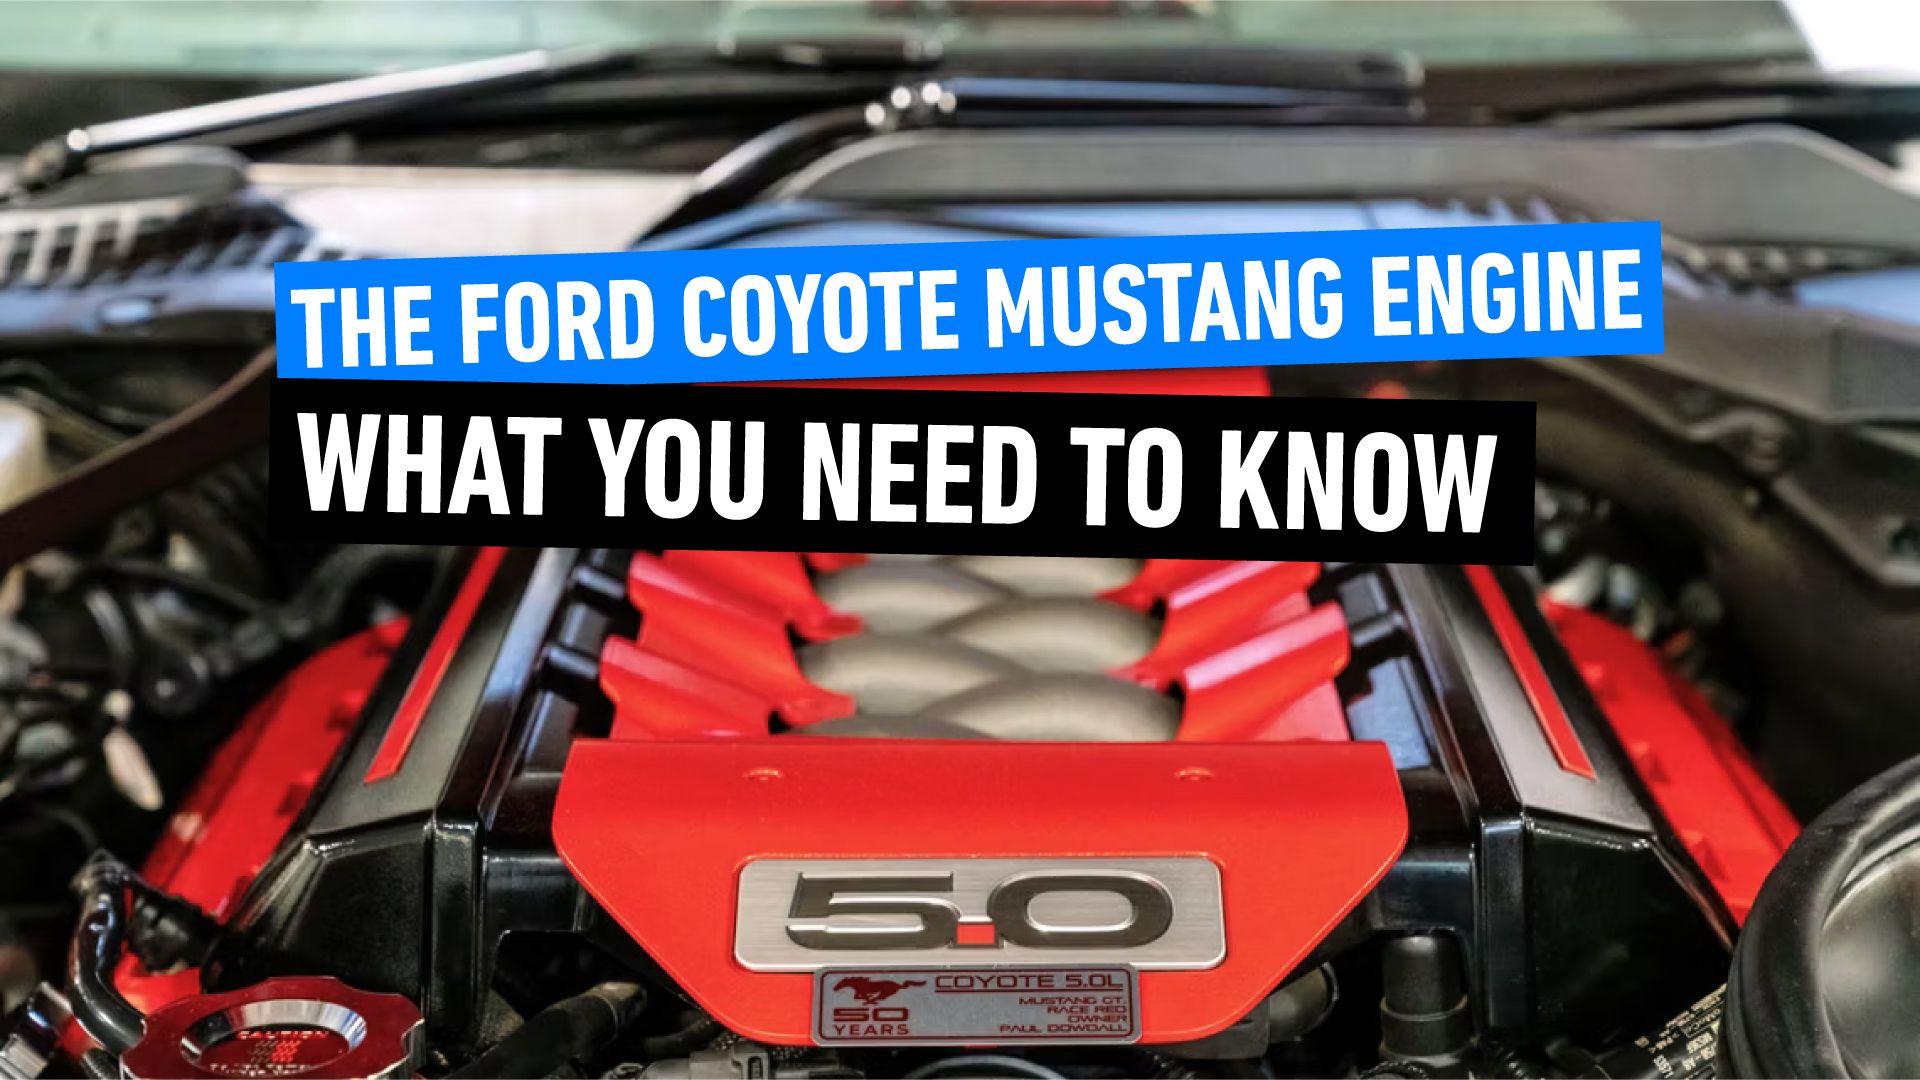 Ford-Coyote-Mustang-Engine